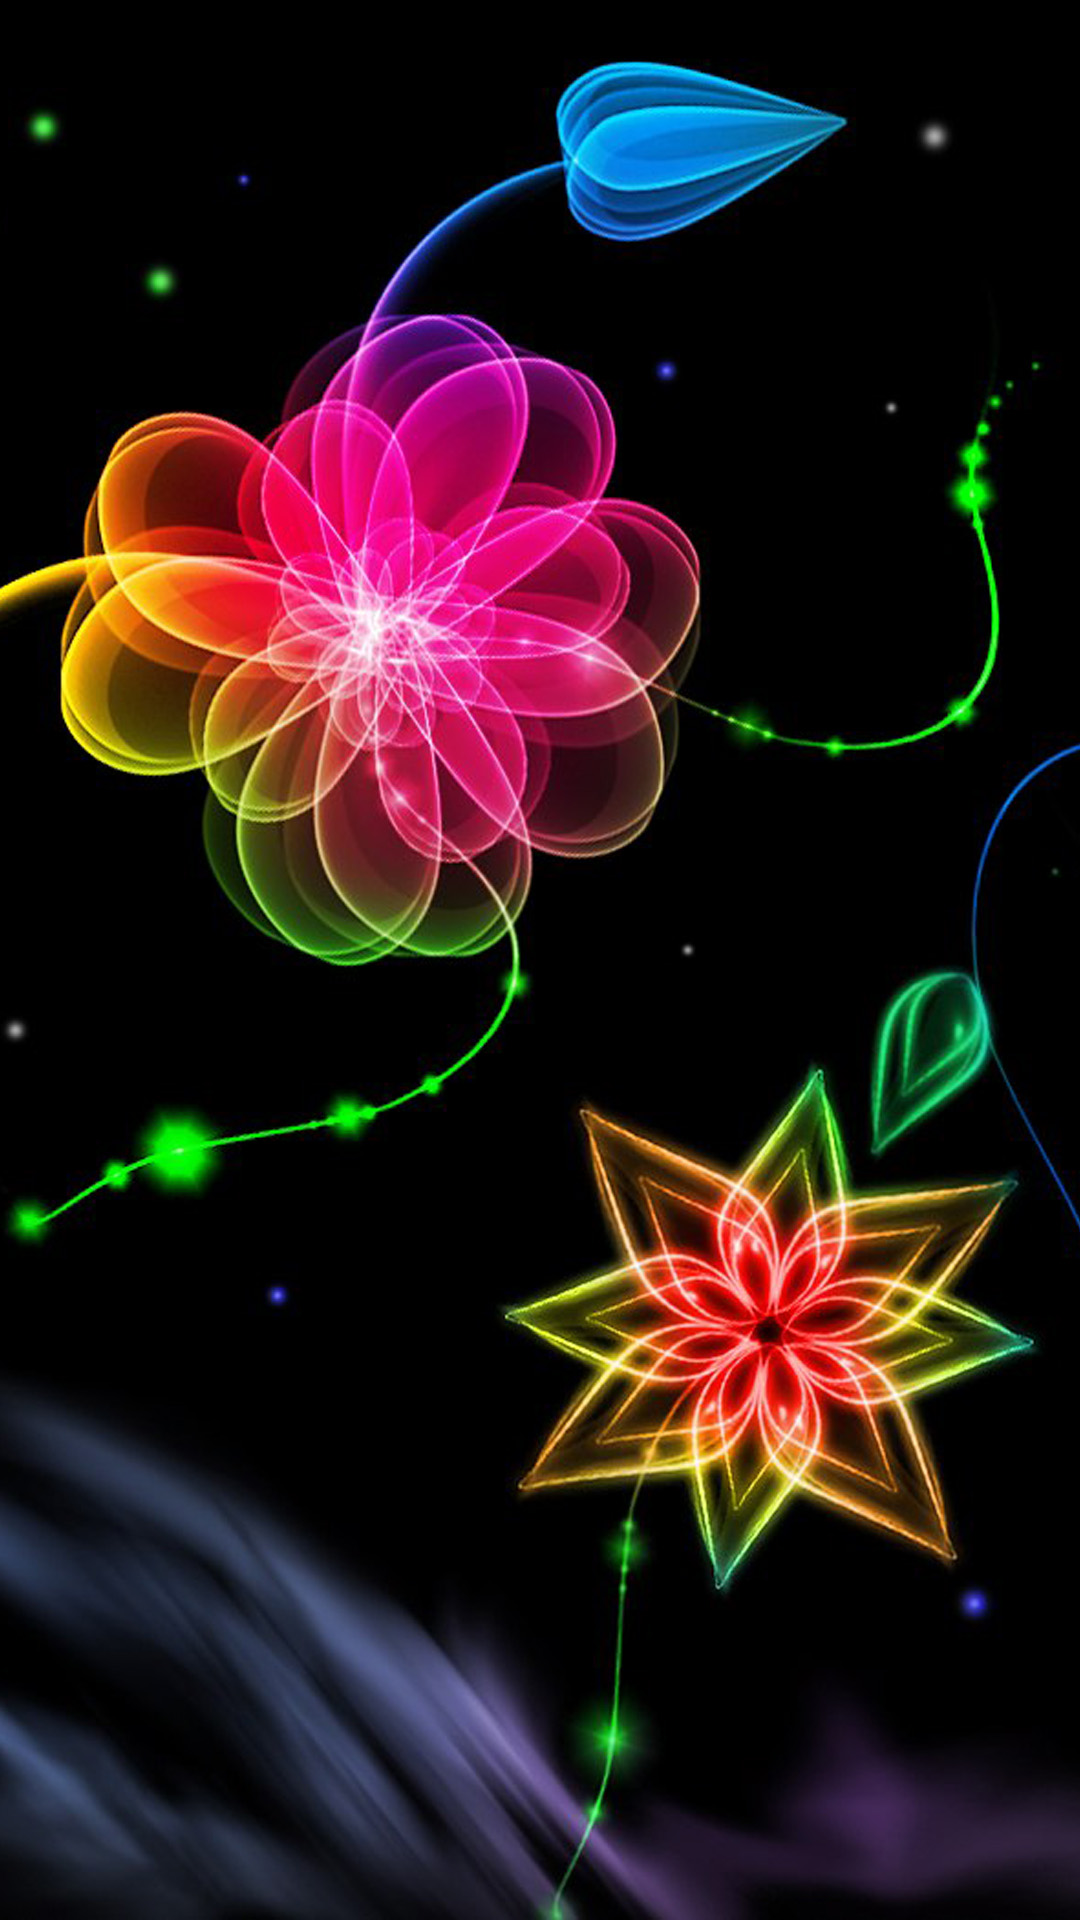 3d Space Flower For Iphone 6 Plus Wallpaper Iphone 6 Plus Wallpaper Iphone13 スマホ壁紙 待受画像ギャラリー